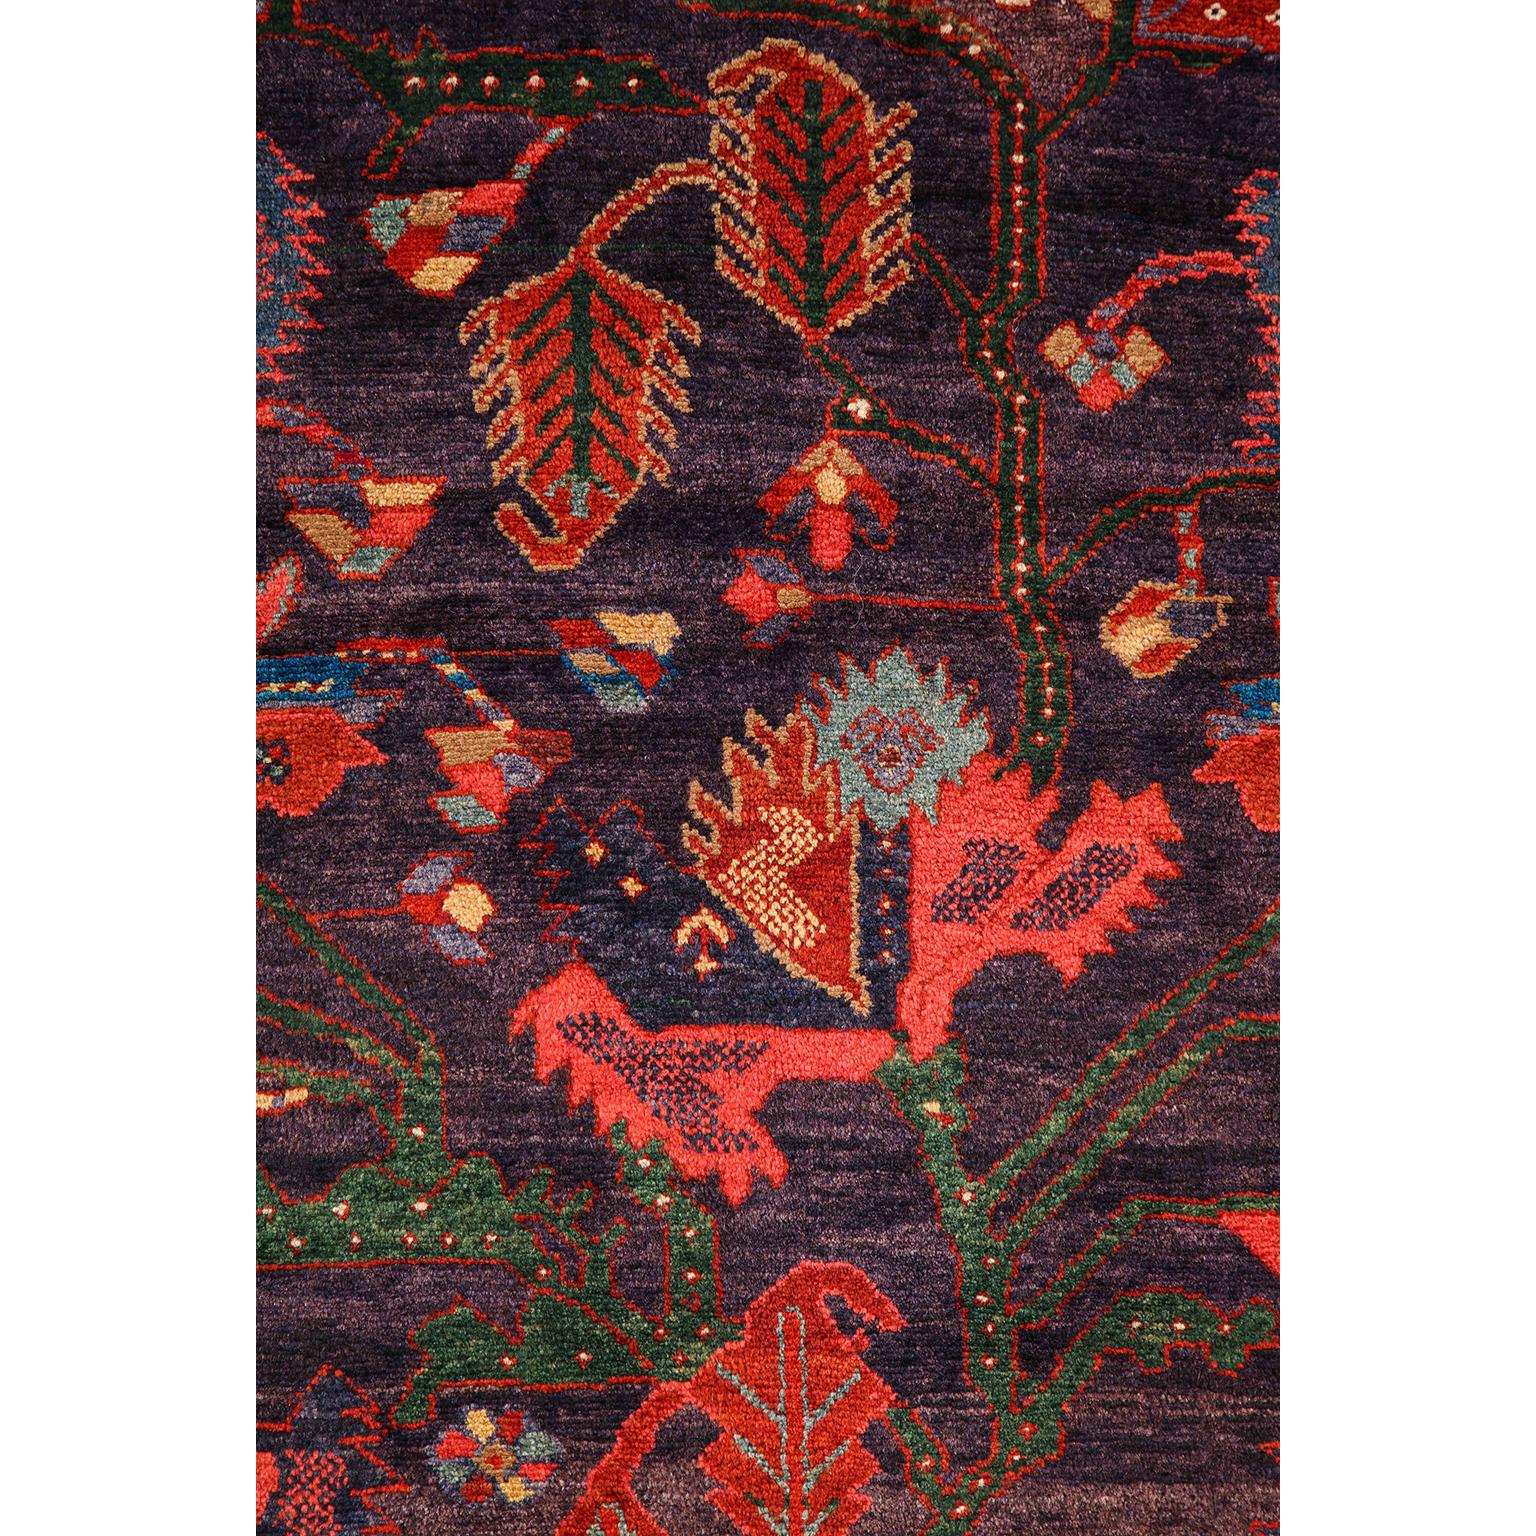 Vegetable Dyed Antique 1910s Saveh Tree of Life Persian Rug, 5' x 7' For Sale